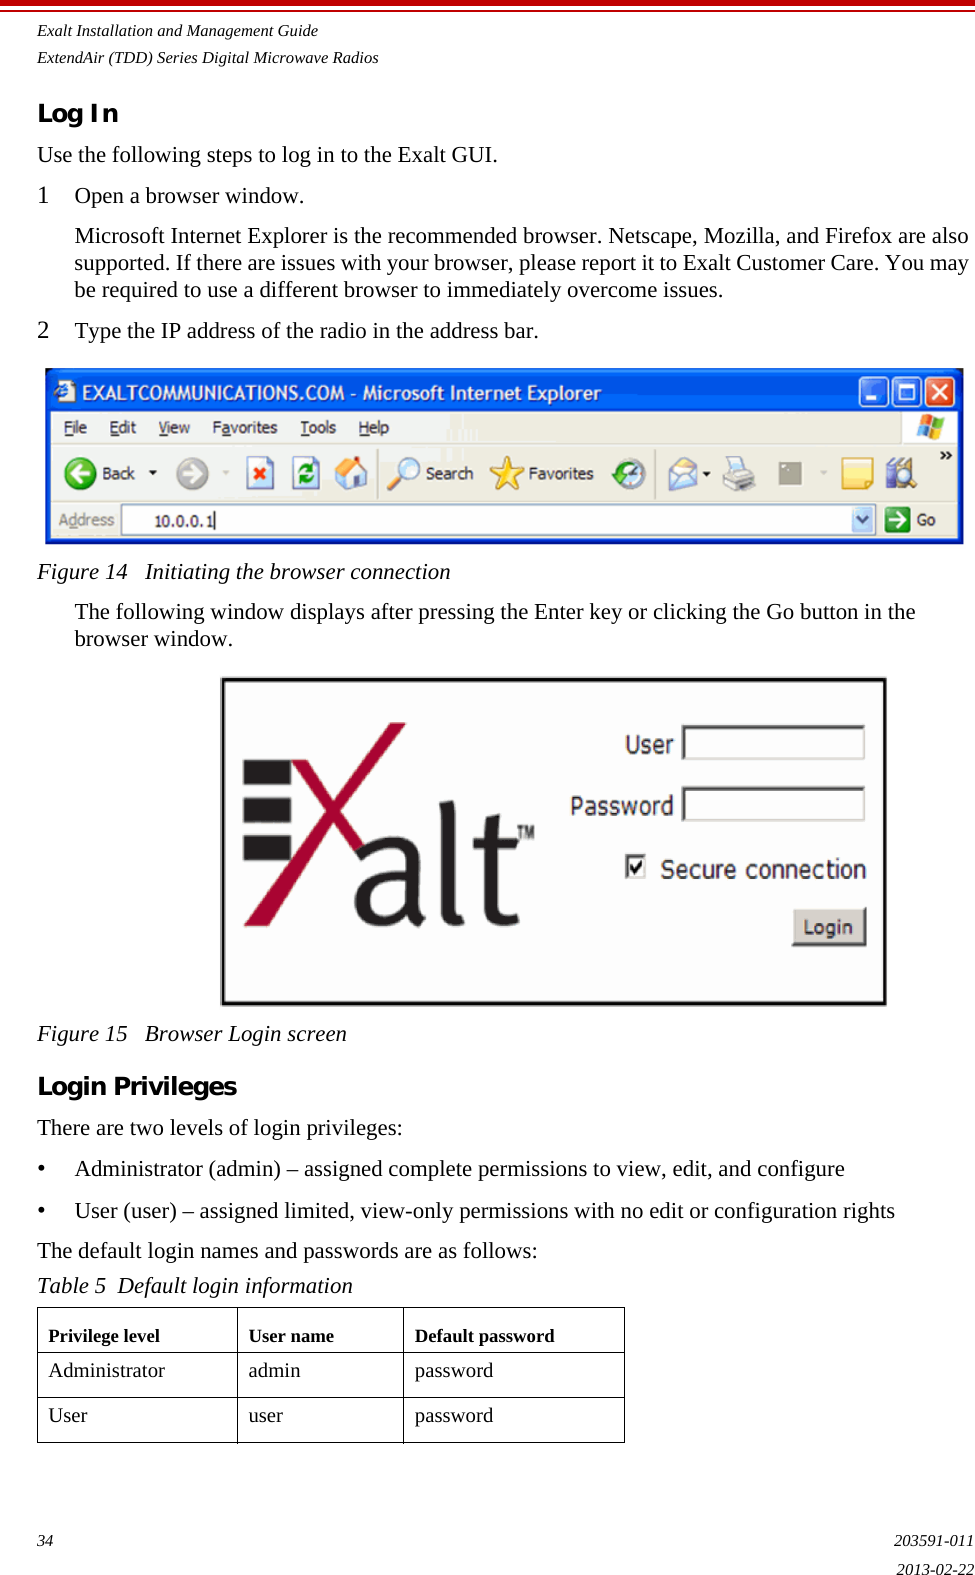 Exalt Installation and Management GuideExtendAir (TDD) Series Digital Microwave Radios34 203591-0112013-02-22Log InUse the following steps to log in to the Exalt GUI.1Open a browser window. Microsoft Internet Explorer is the recommended browser. Netscape, Mozilla, and Firefox are also supported. If there are issues with your browser, please report it to Exalt Customer Care. You may be required to use a different browser to immediately overcome issues.2Type the IP address of the radio in the address bar.Figure 14   Initiating the browser connectionThe following window displays after pressing the Enter key or clicking the Go button in the browser window.Figure 15   Browser Login screenLogin PrivilegesThere are two levels of login privileges:•Administrator (admin) – assigned complete permissions to view, edit, and configure•User (user) – assigned limited, view-only permissions with no edit or configuration rightsThe default login names and passwords are as follows:Table 5  Default login informationPrivilege level User name Default passwordAdministrator admin passwordUser user password